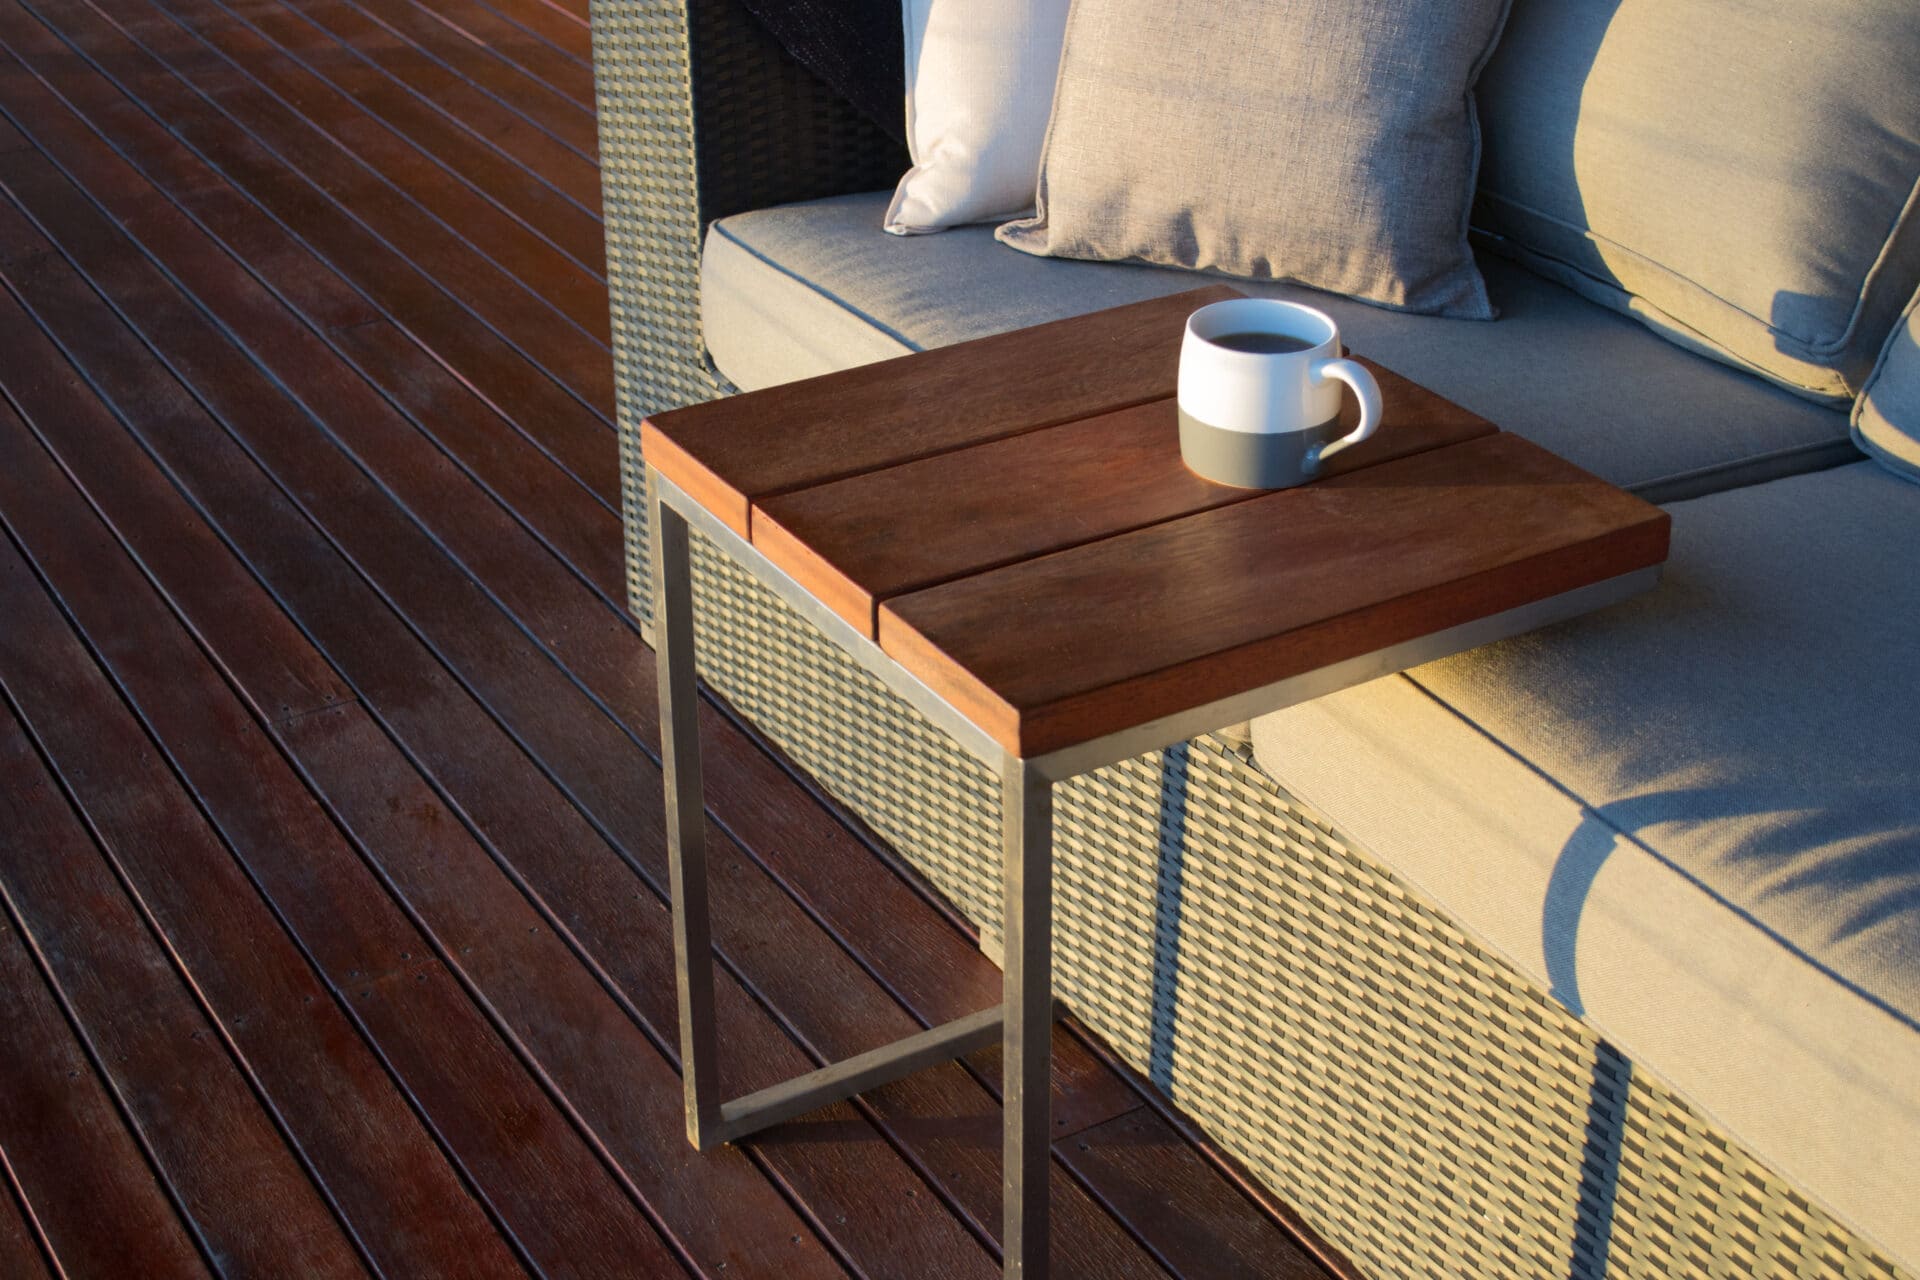 Timber decking is an eco-friendly option